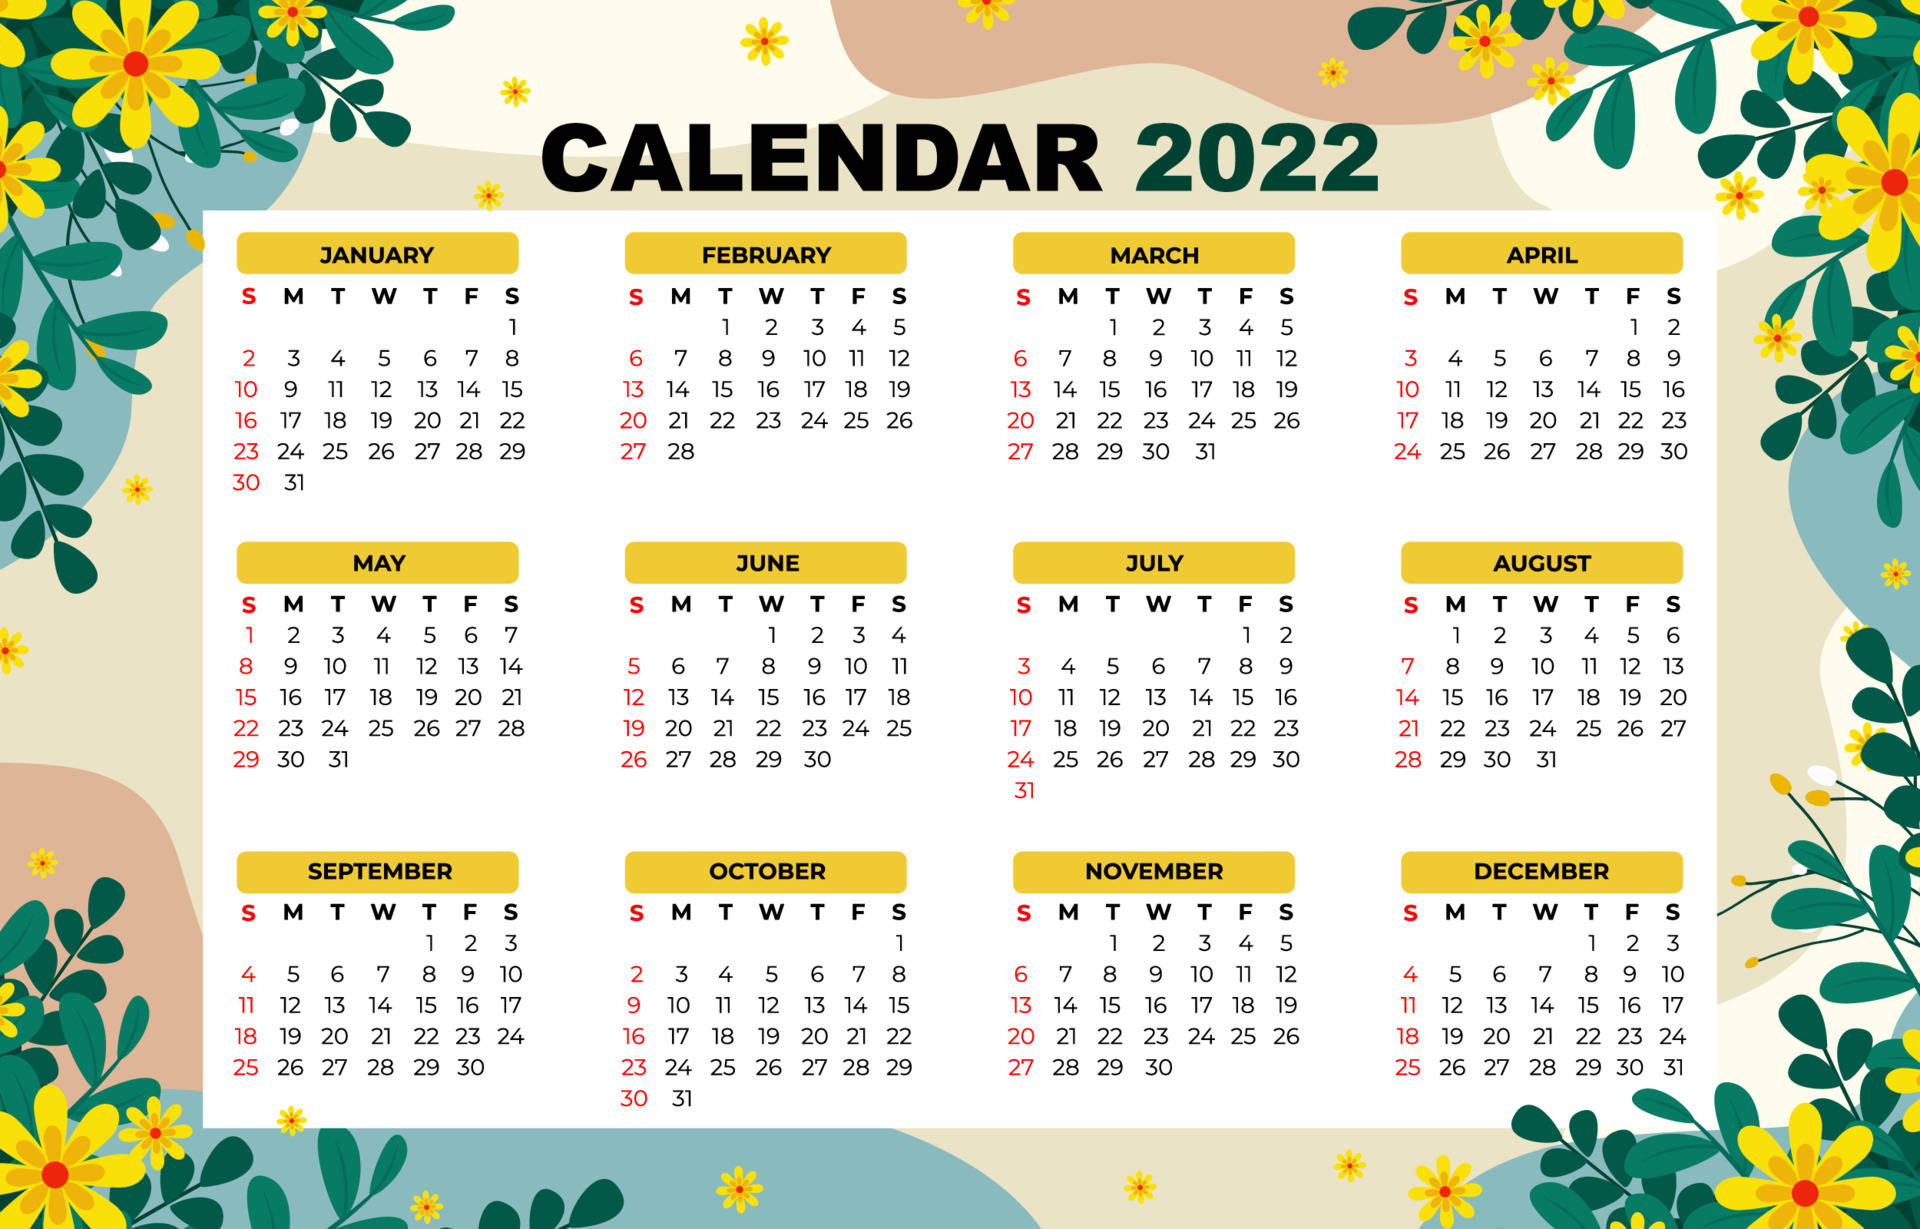 2022 Calendar With Daffodil Flower Picture